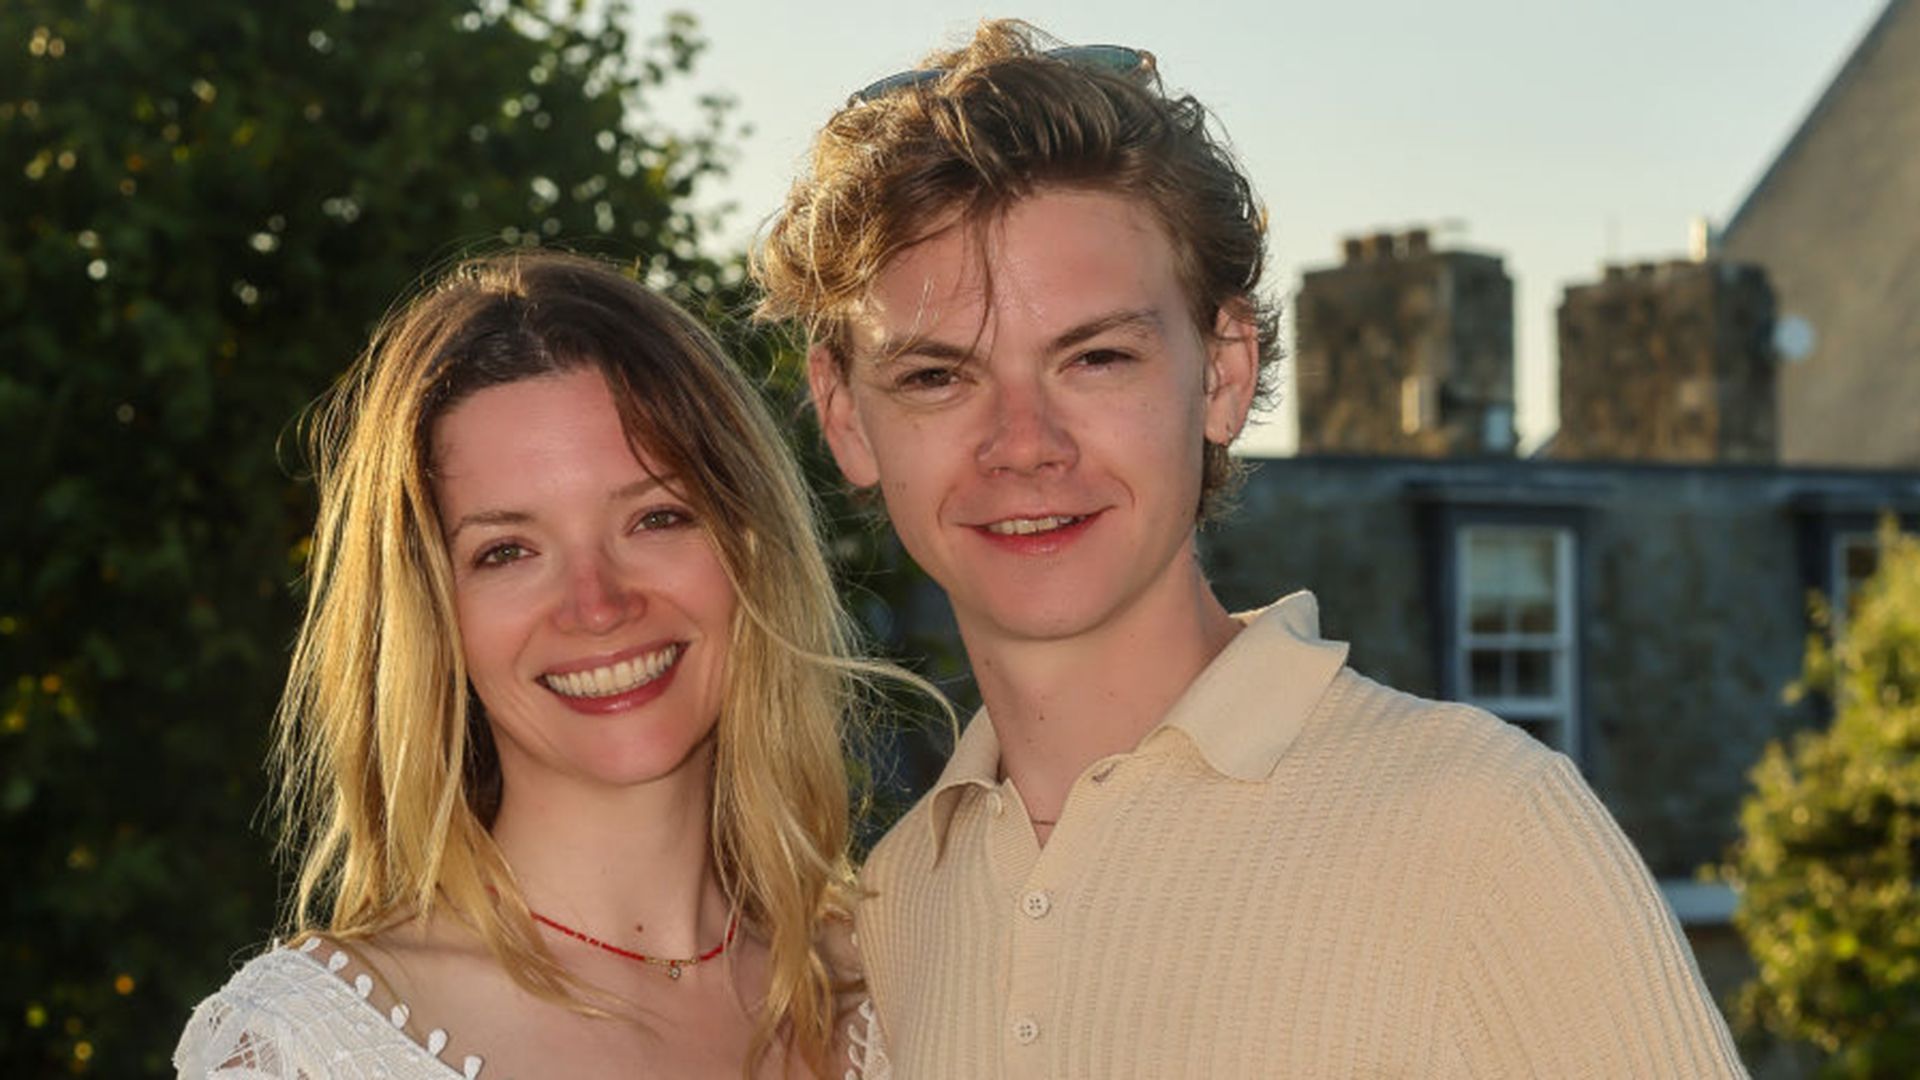 Talulah Riley and Thomas Brodie-Sangster cuddle up for a photo